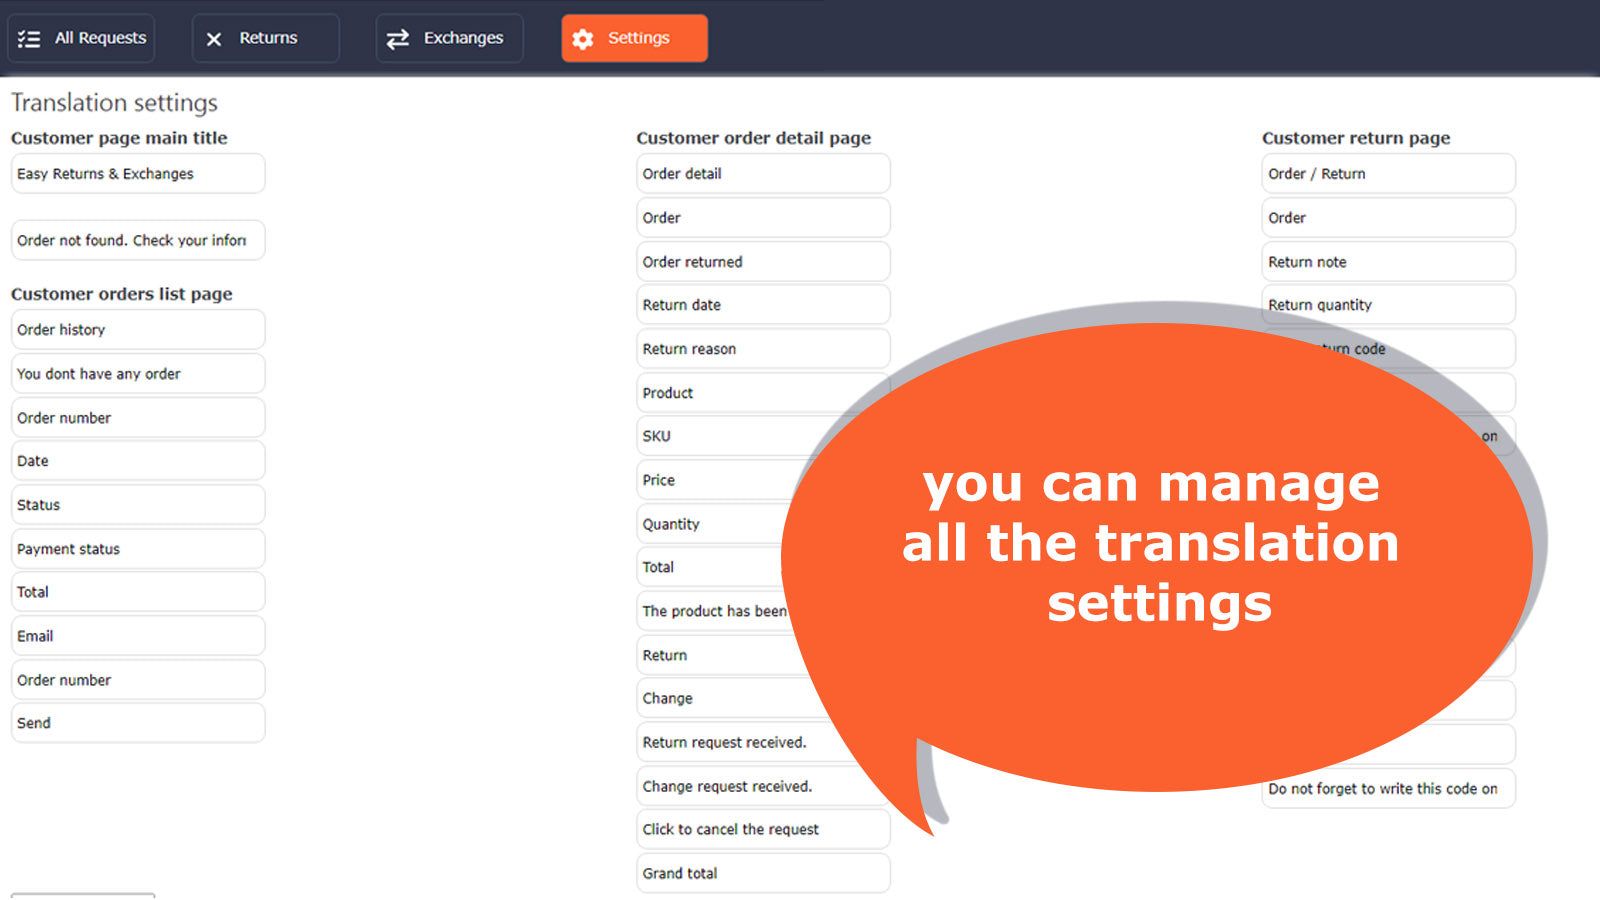 You can manage all the translation settings